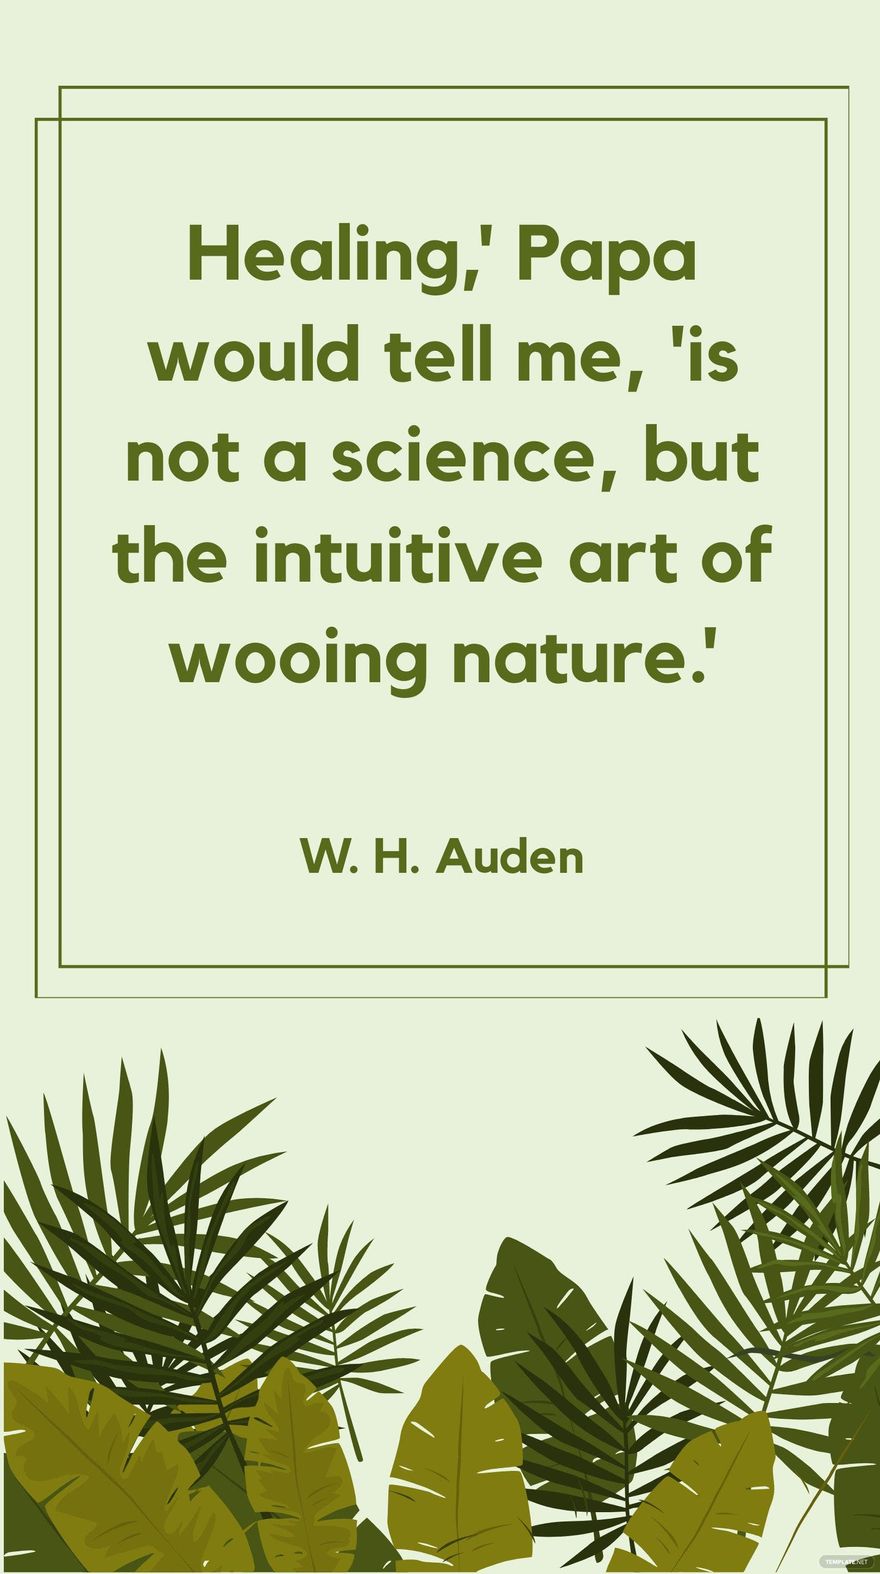 W. H. Auden - Healing,' Papa would tell me, 'is not a science, but the intuitive art of wooing nature.' in JPG